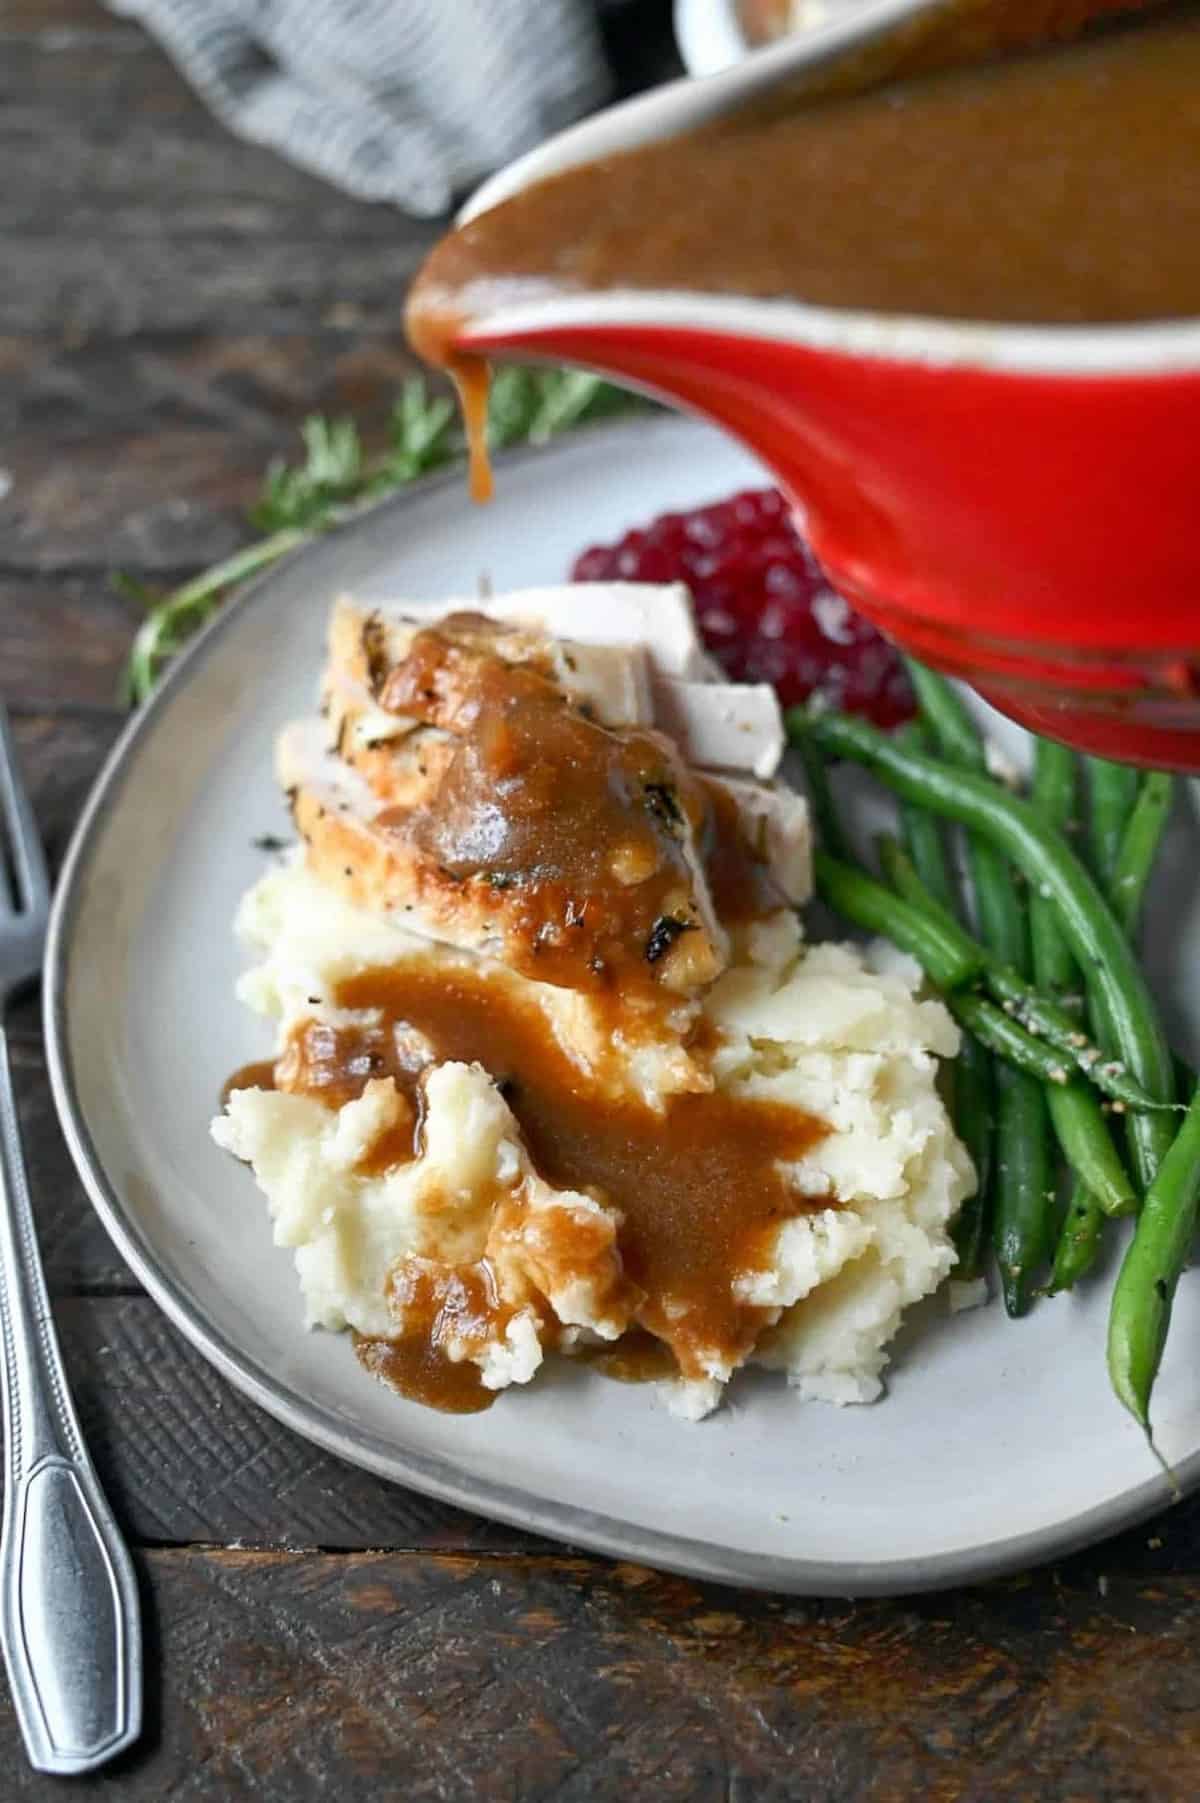 Turkey gravy being poured on top of mashed potatoes and sliced turkey.